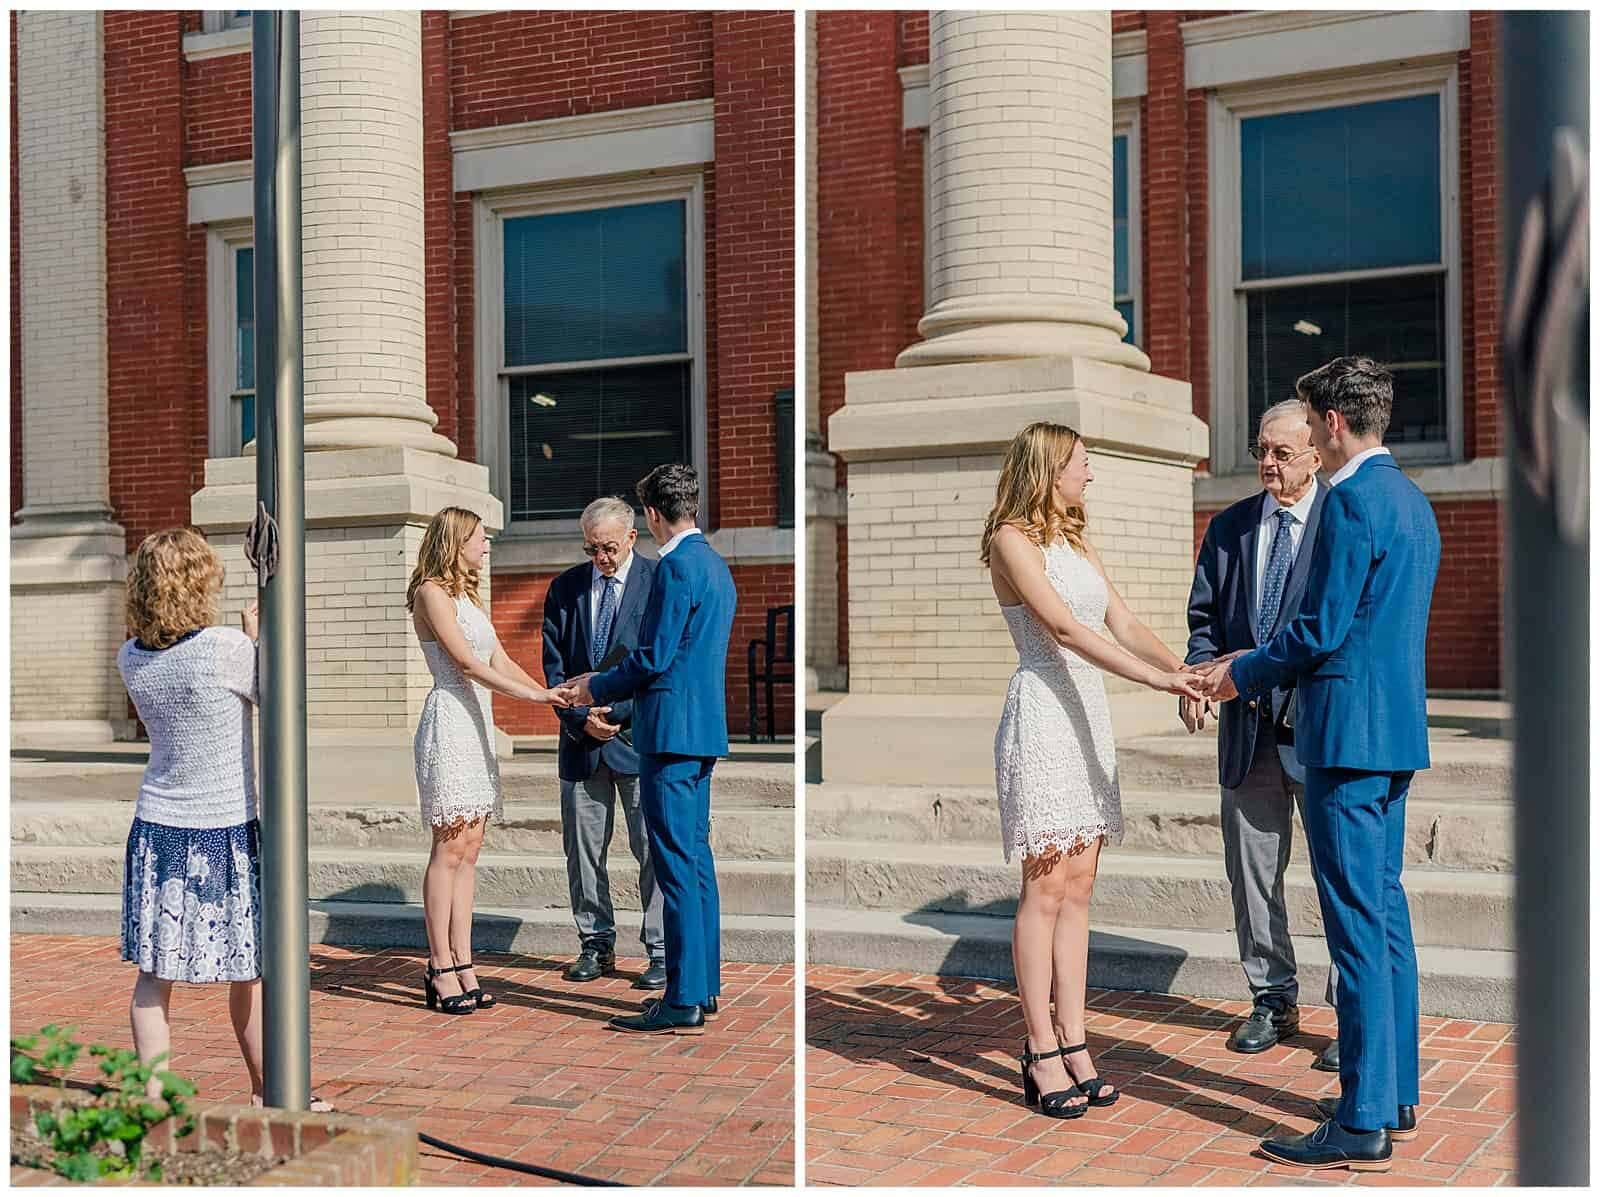 Couple stand holding hands and looking at their elopement officiant on the steps of the augusta county courthouse in downtown Staunton VA on a summer morning. The Bride's mother is standing nearby taking photographs on her cell phone.